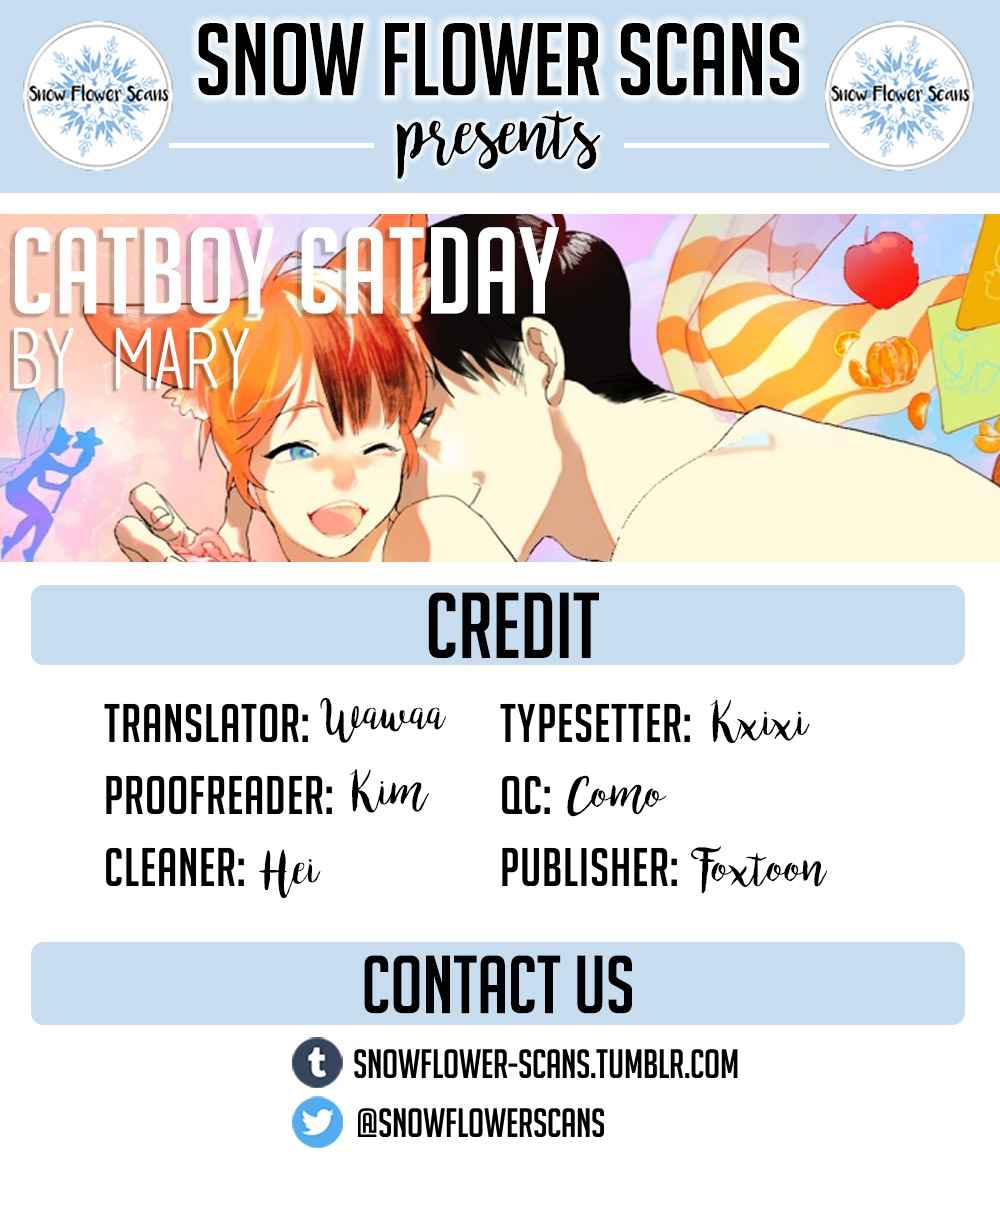 Catboy Catday Ch. 41 Apologize